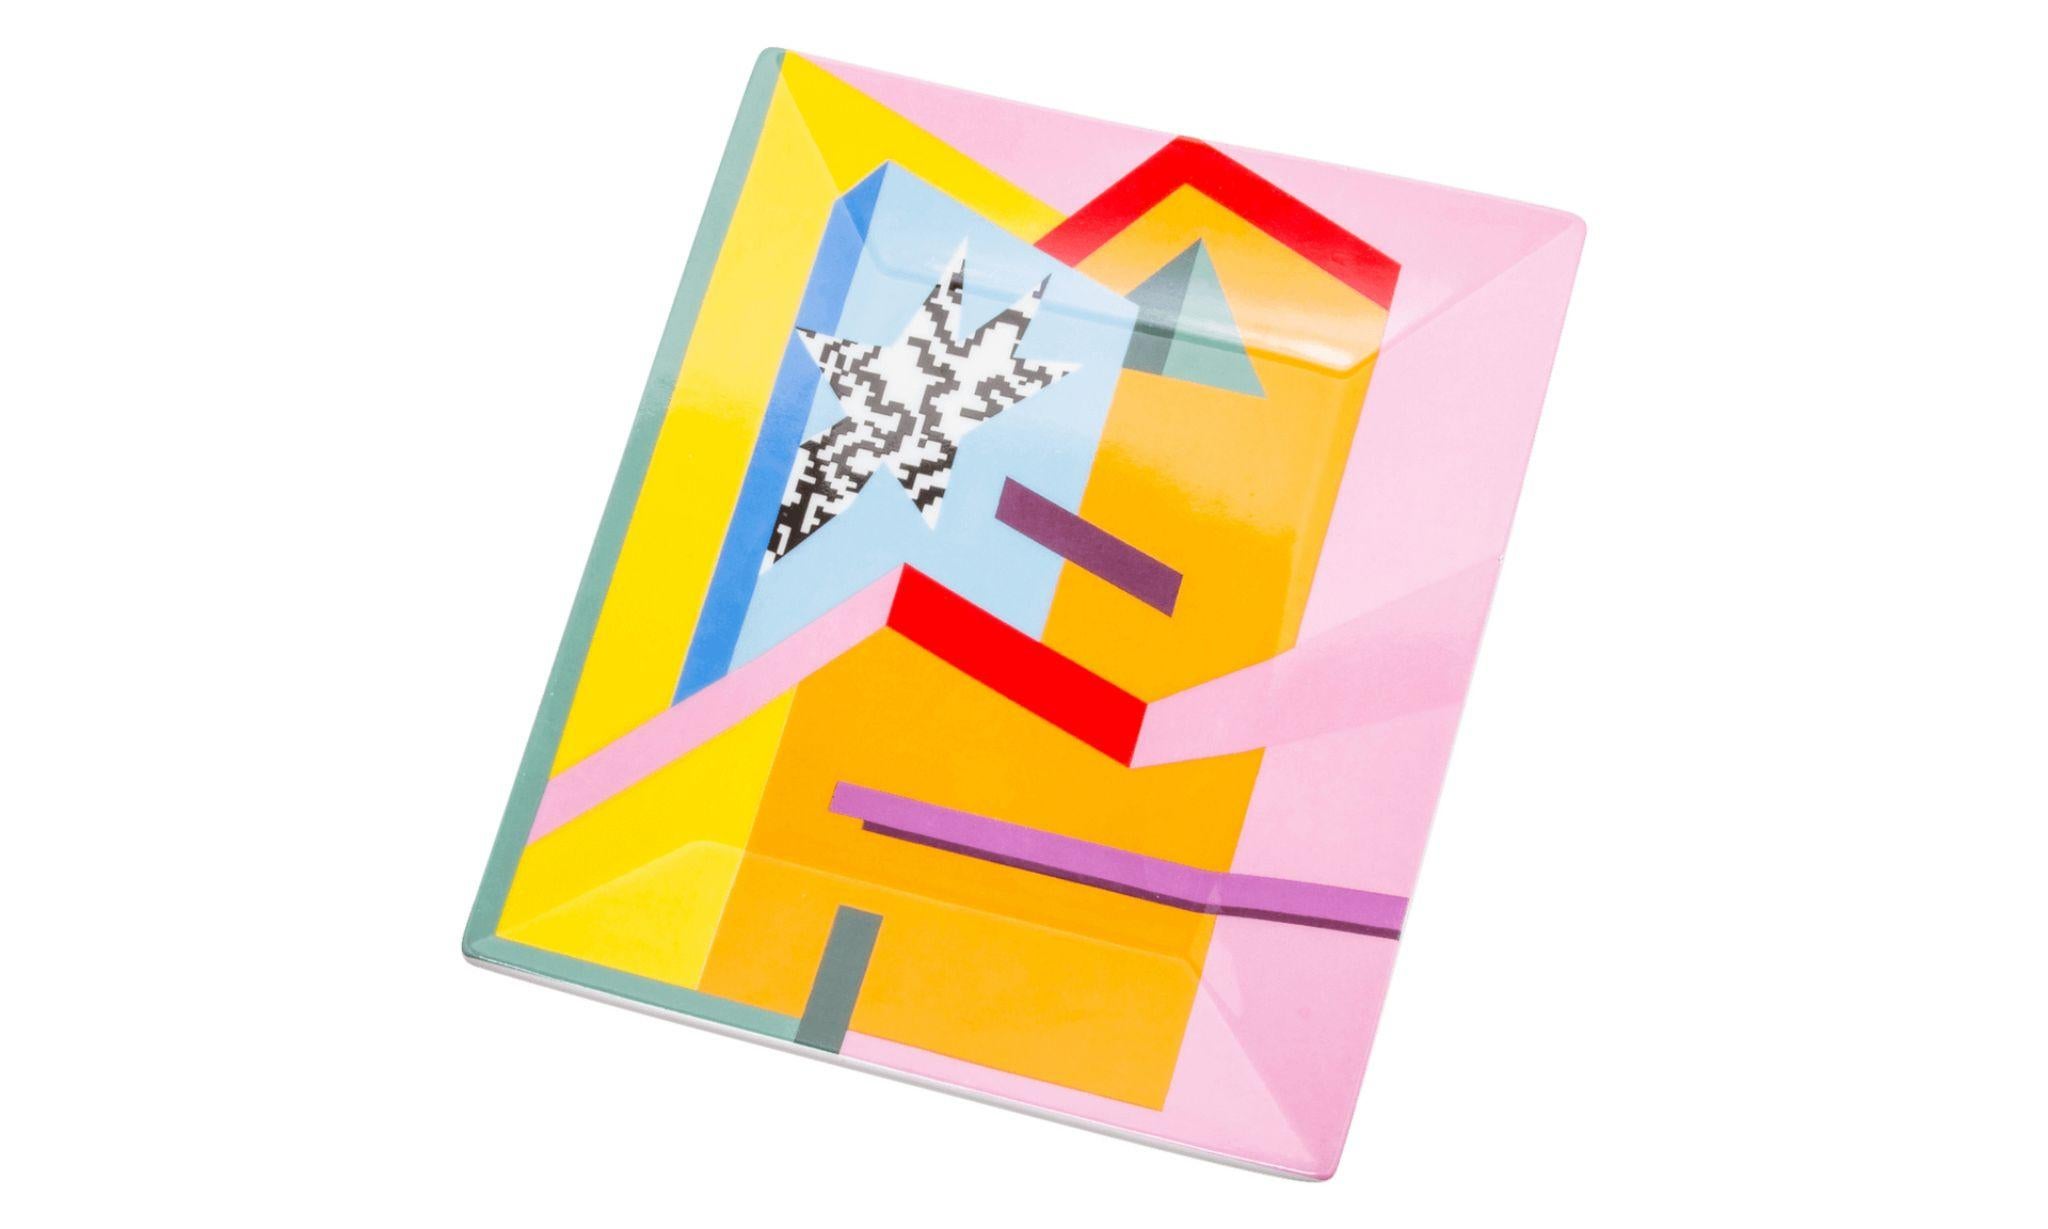 Large Abstract Ceramic Tray Designed for Supreme 5.9 inches by 7.1 inches - Sculpture by Alessandro Mendini